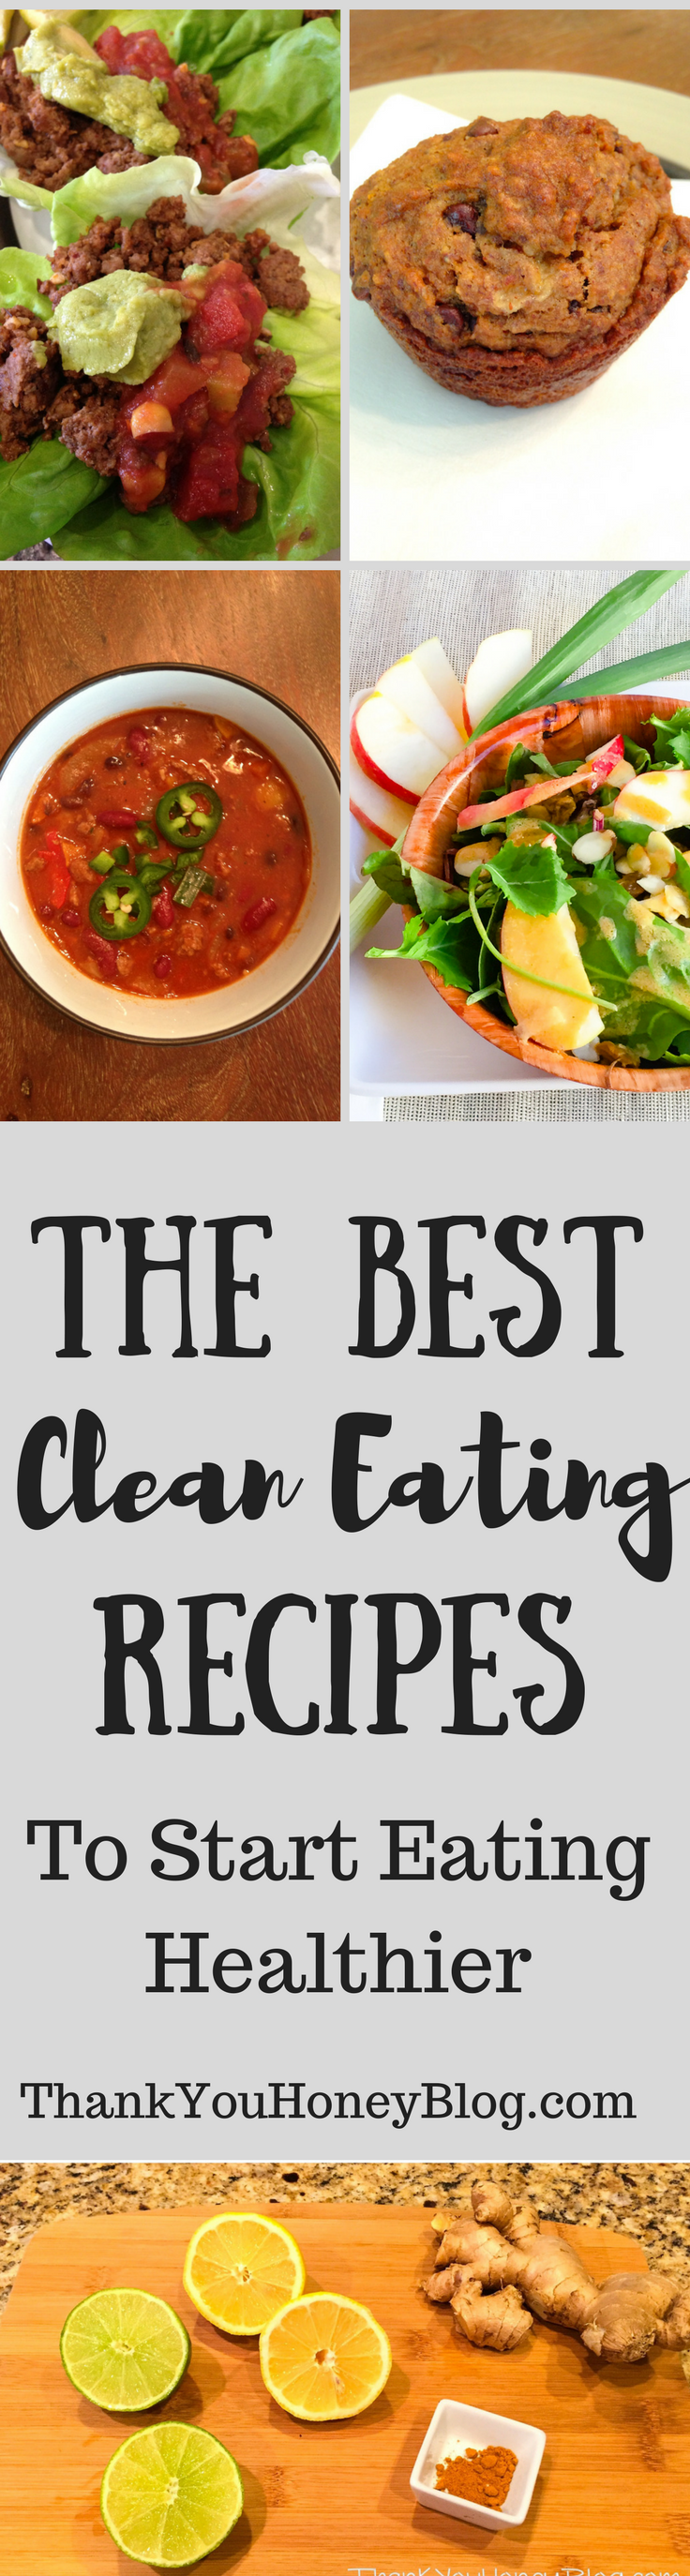 The Best Clean Eating Recipes to Start Eating Healthier